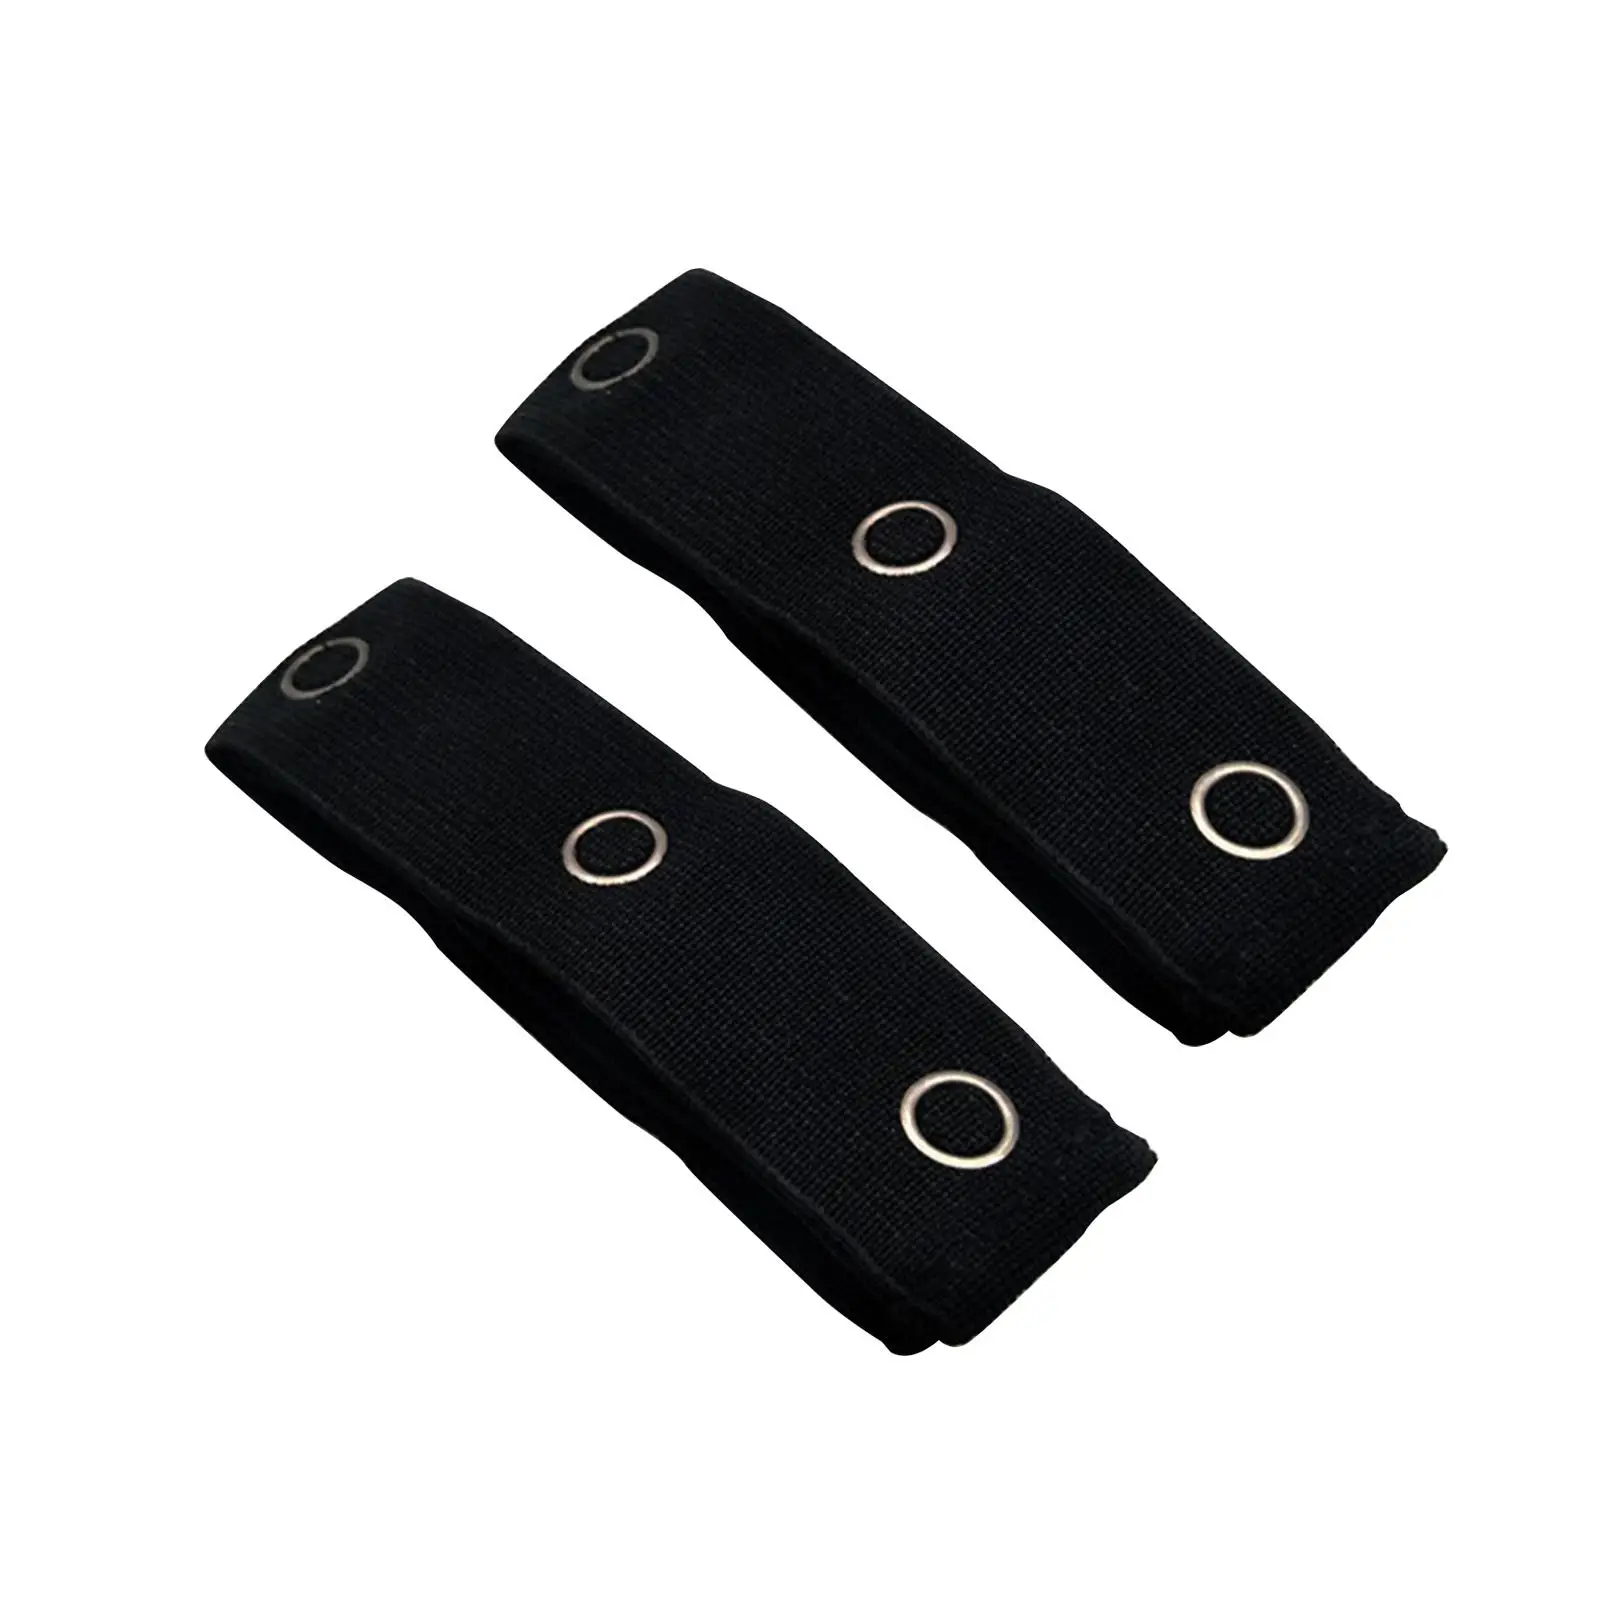 1 Pair Pants Button Extenders Spare Adjustable Multifunctional Easy to Use Elastic Portable Waistband Extenders for Pants Jeans